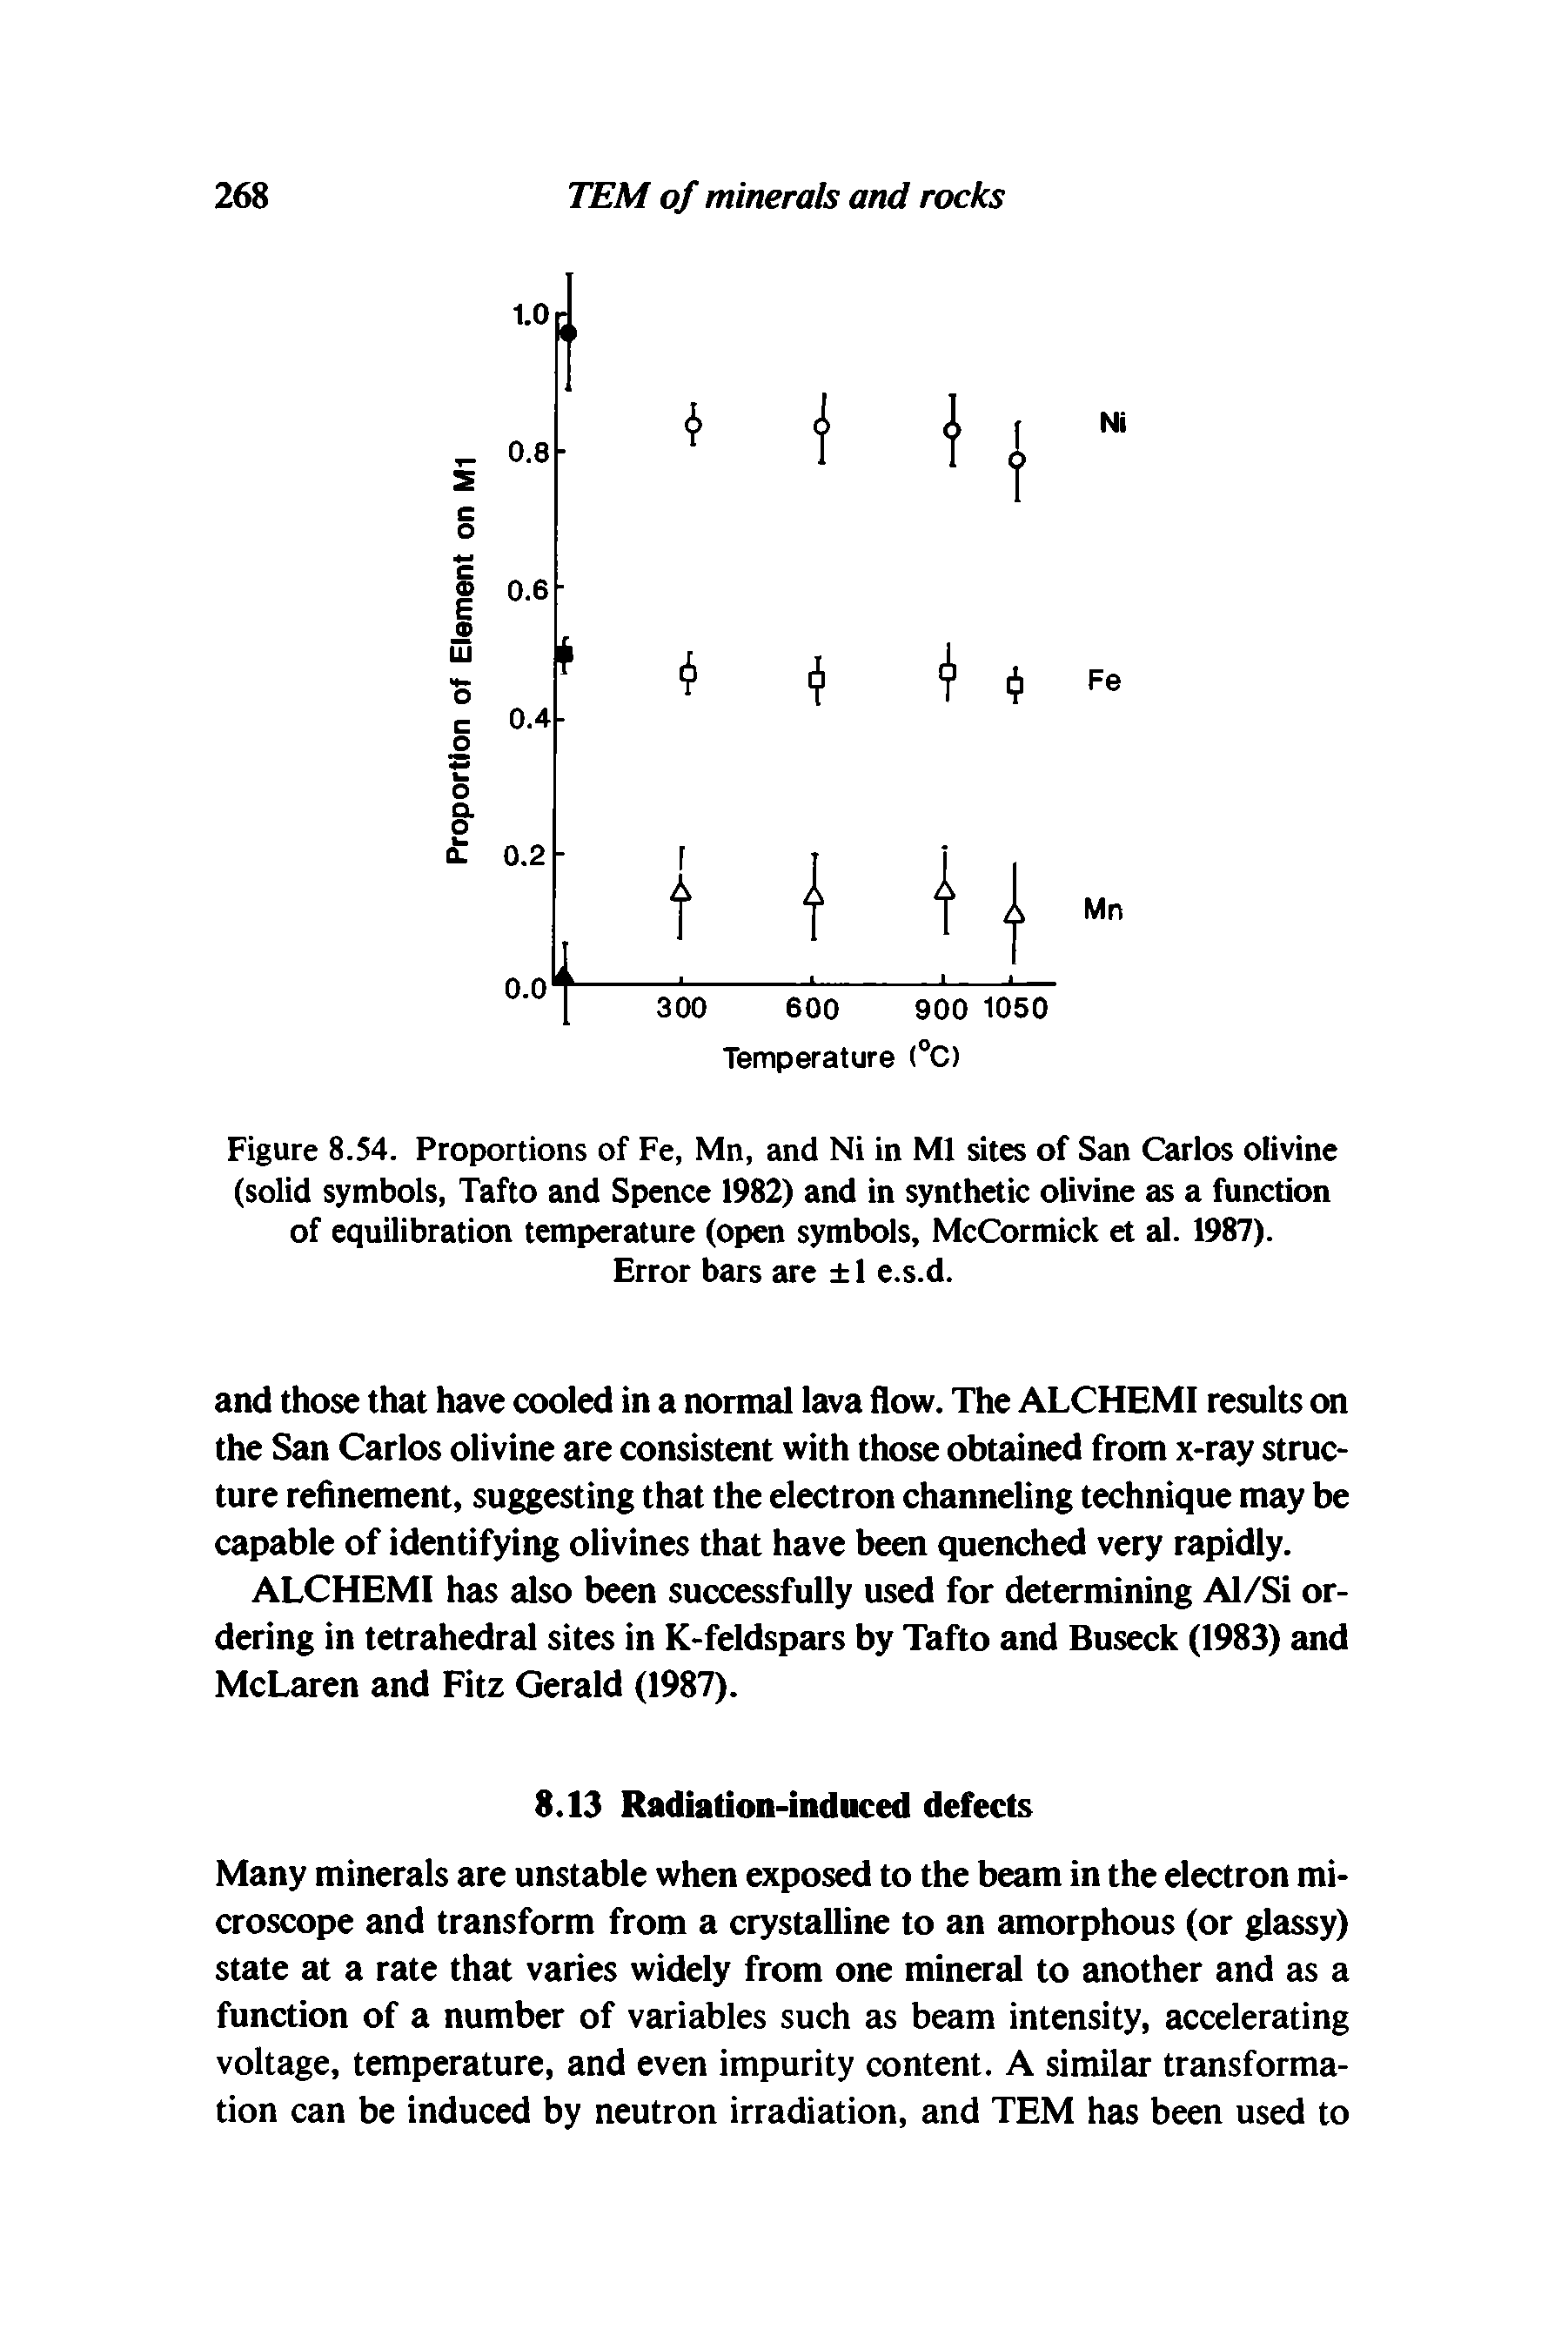 Figure 8.54. Proportions of Fe, Mn, and Ni in Ml sites of San Carlos olivine (solid symbols, Tafto and Spence 1982) and in synthetic olivine as a function of equilibration temperature (open symbols, McCormick et al. 1987). Error bars are 1 e.s.d.